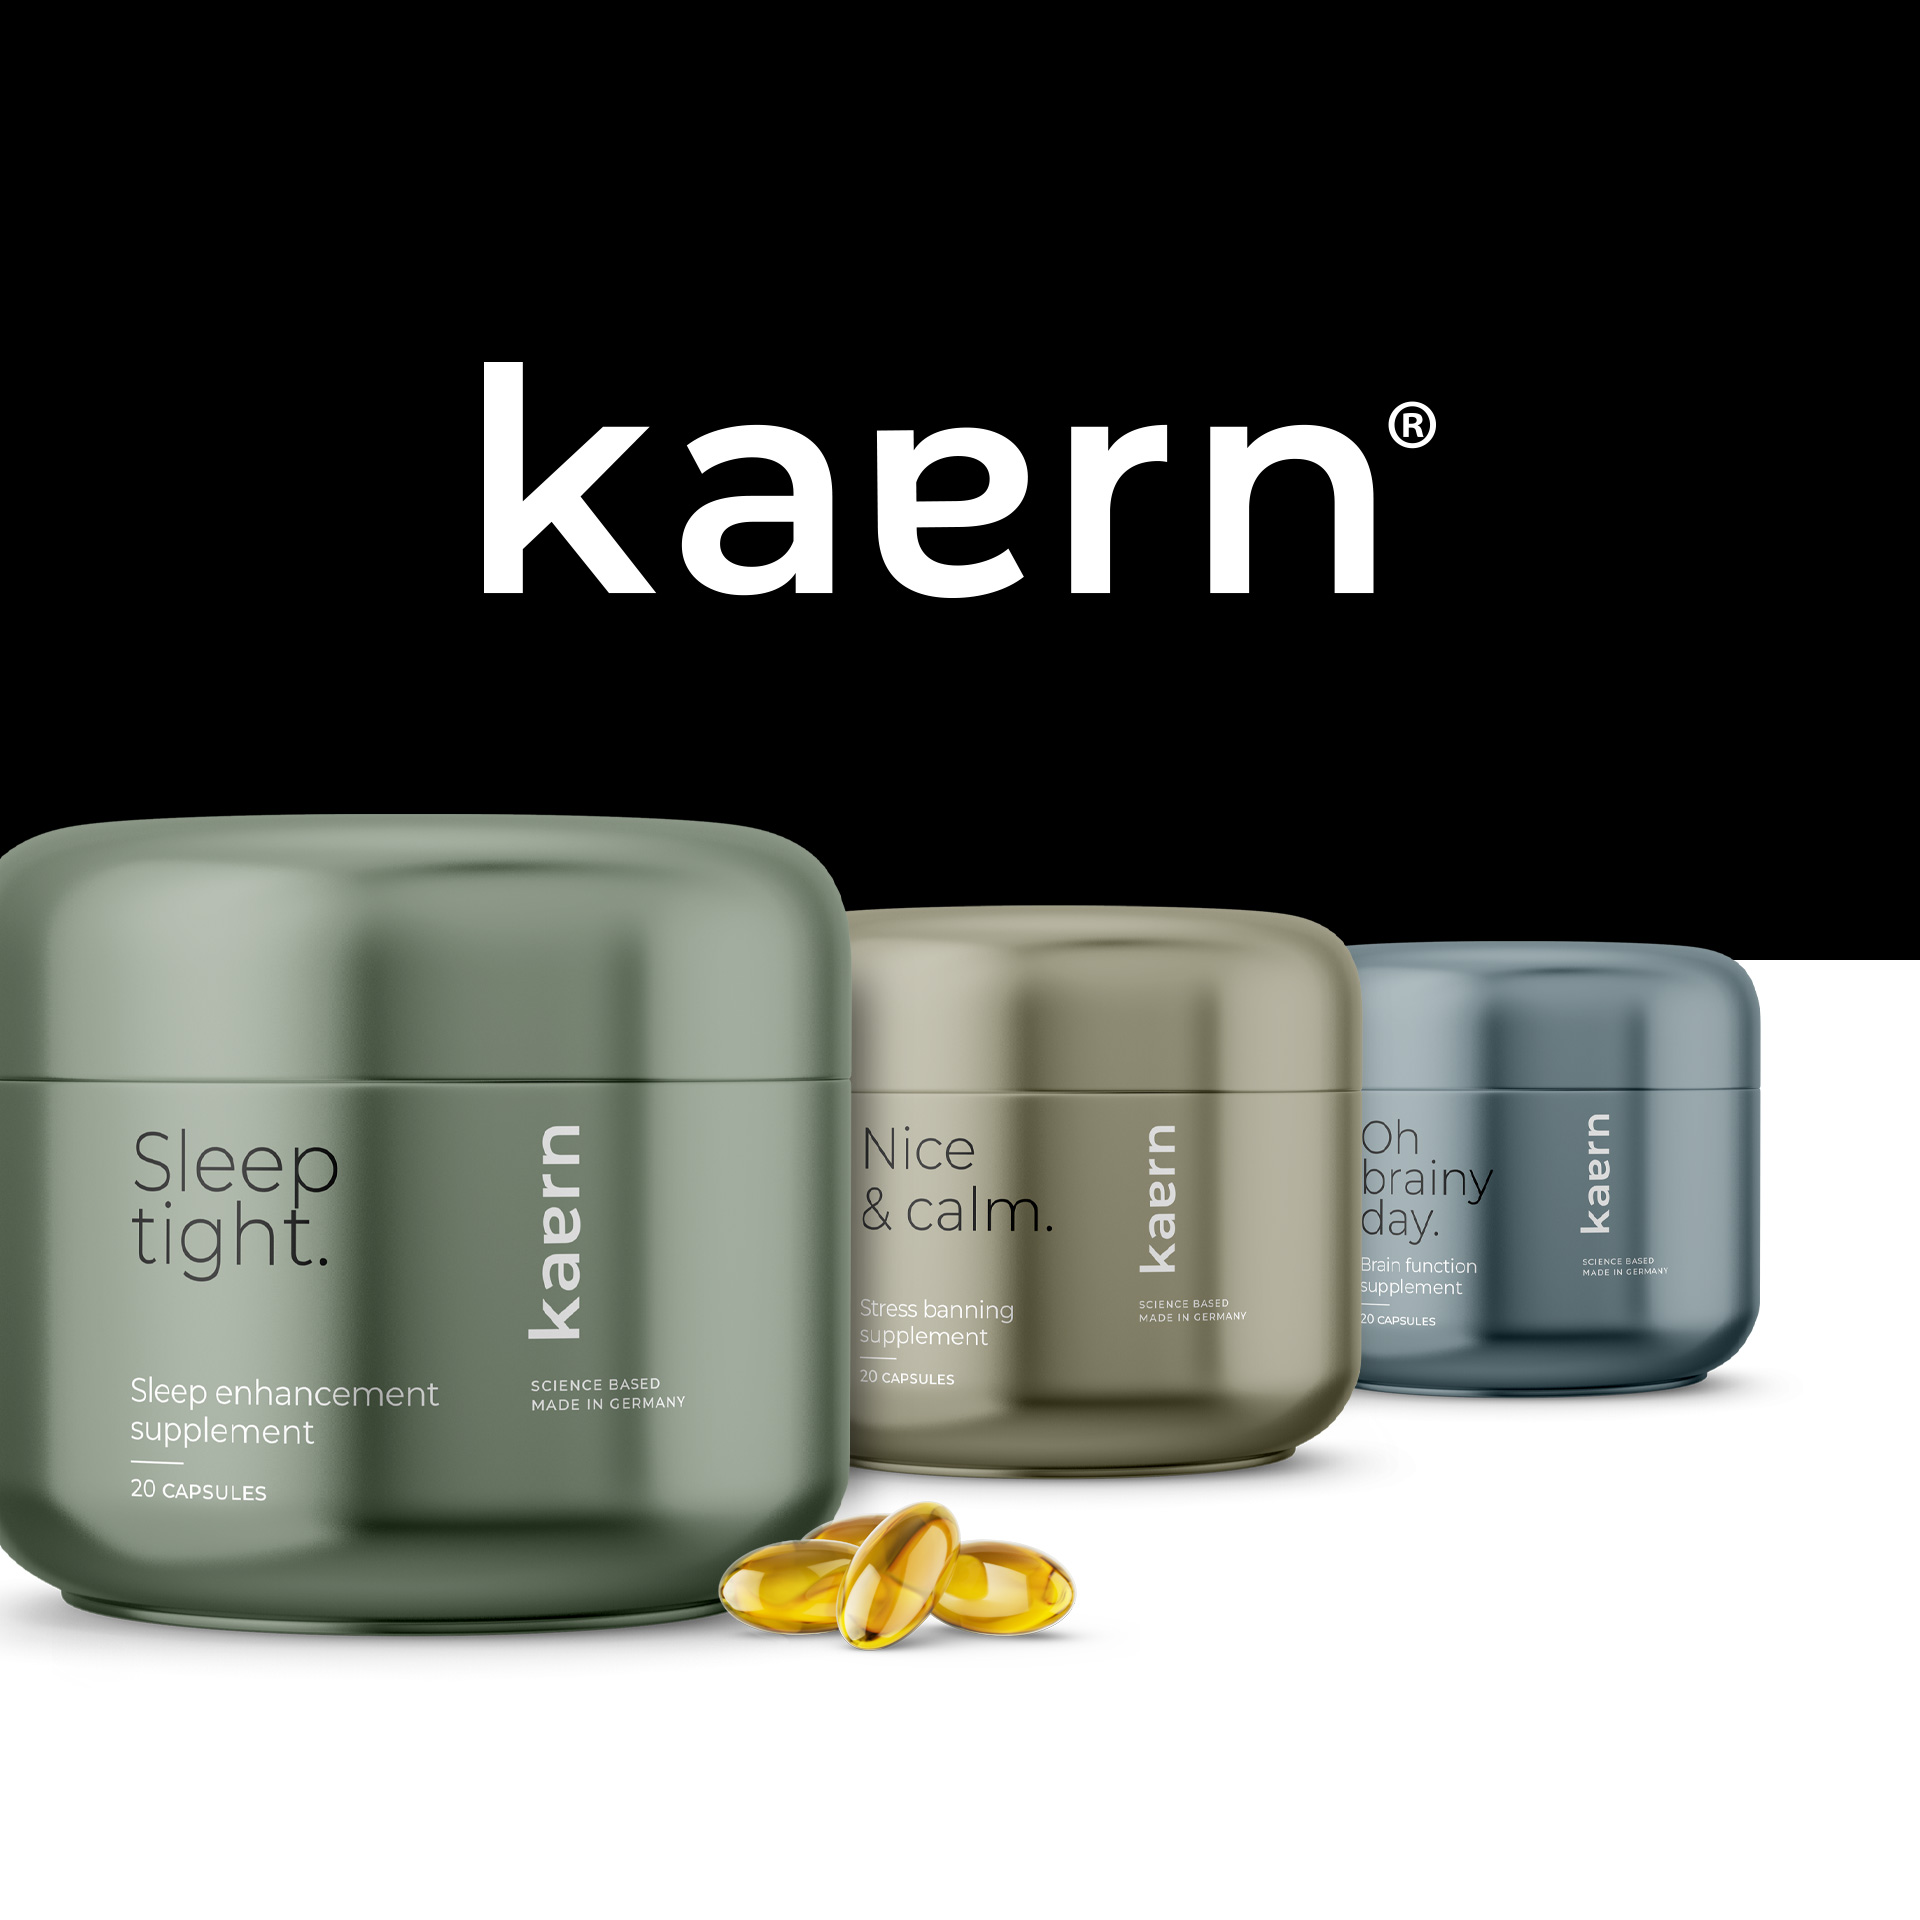 Serenity in Simplicity: Kaern’s Minimalist Brand Identity and Packaging Design by Musen Design